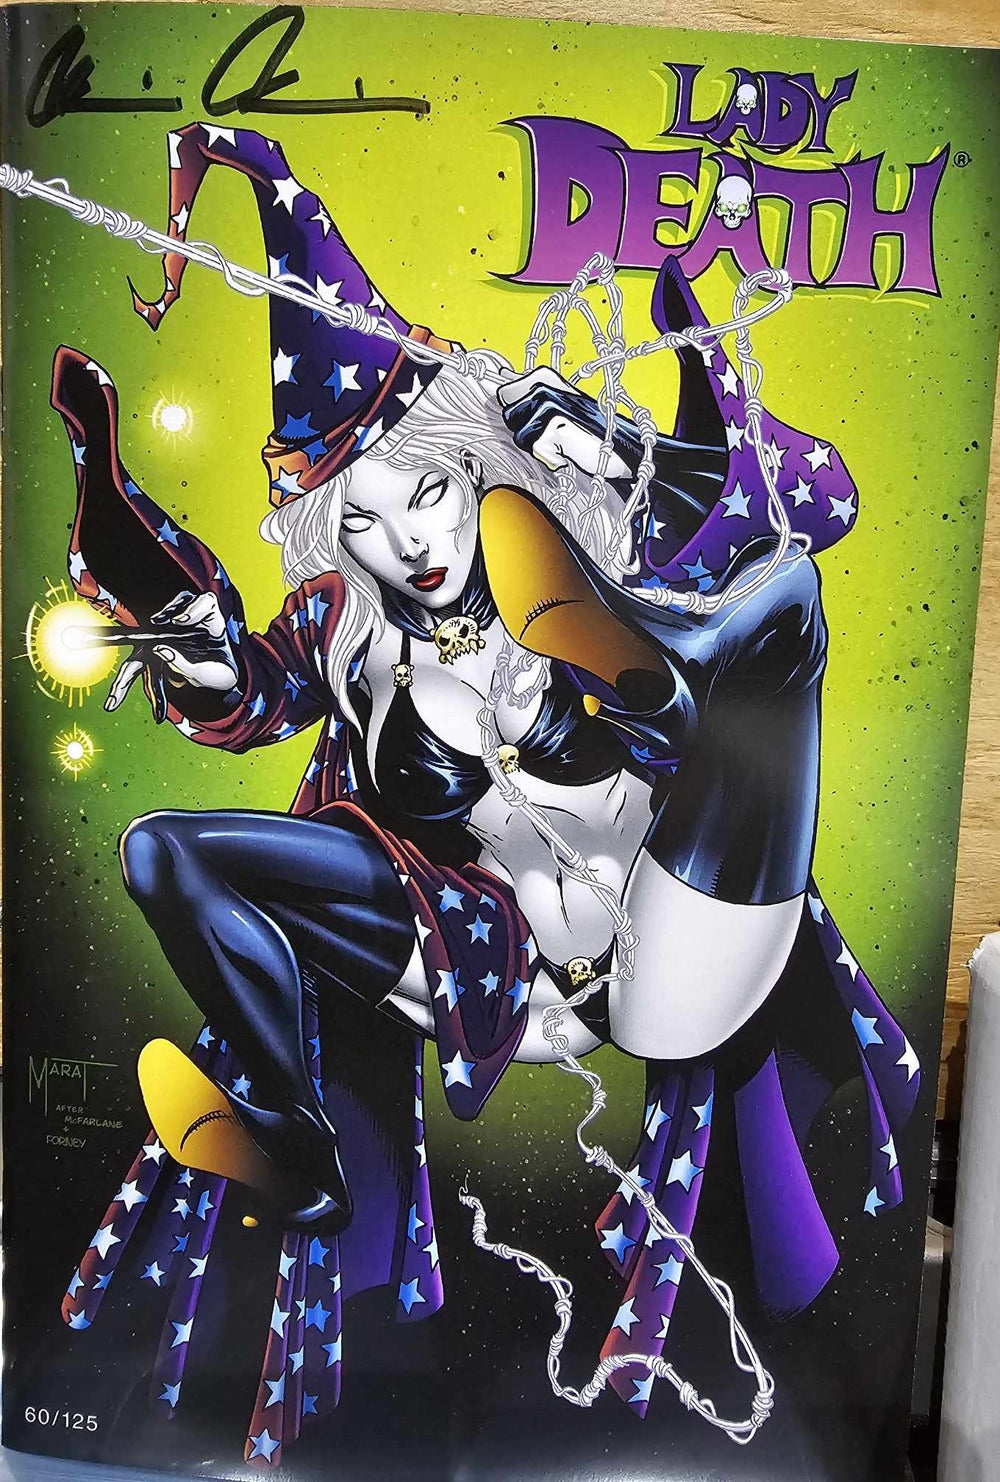 LADY DEATH #1 SDCC Exclusive (WIZARD Magazine Homage #60 of Only 125)